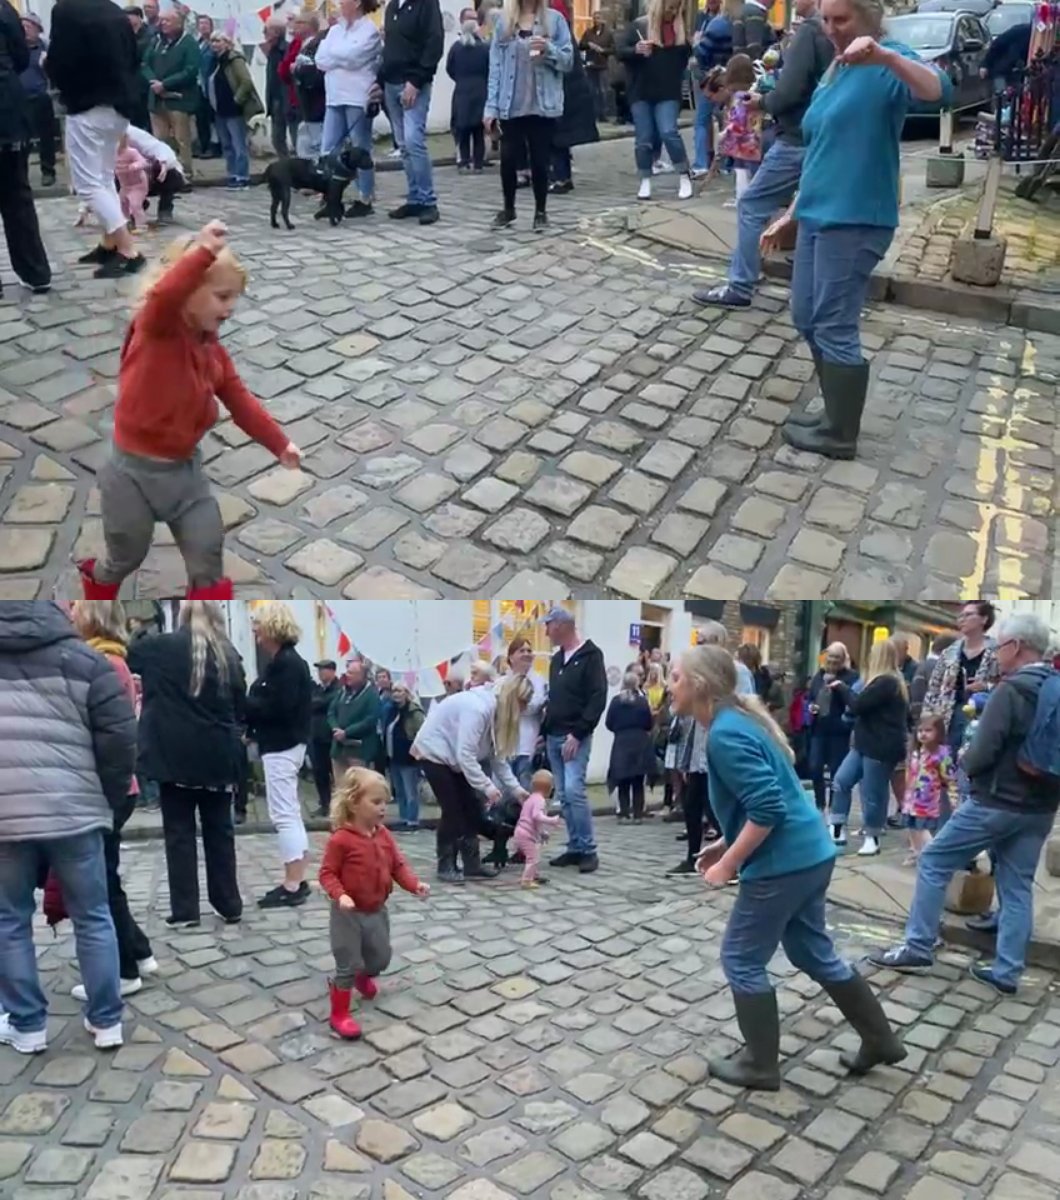 The #staithesfestivalofartsandheritage really is lovely - images from last night enjoying #DireStaithes and dancing between the generations (as photoed by my daughter & son-in-law).

#northyorkmoors #northyorkshire @NorthYorkMoors  @visitnorthyork #visitnorthyorkshire #Staithes